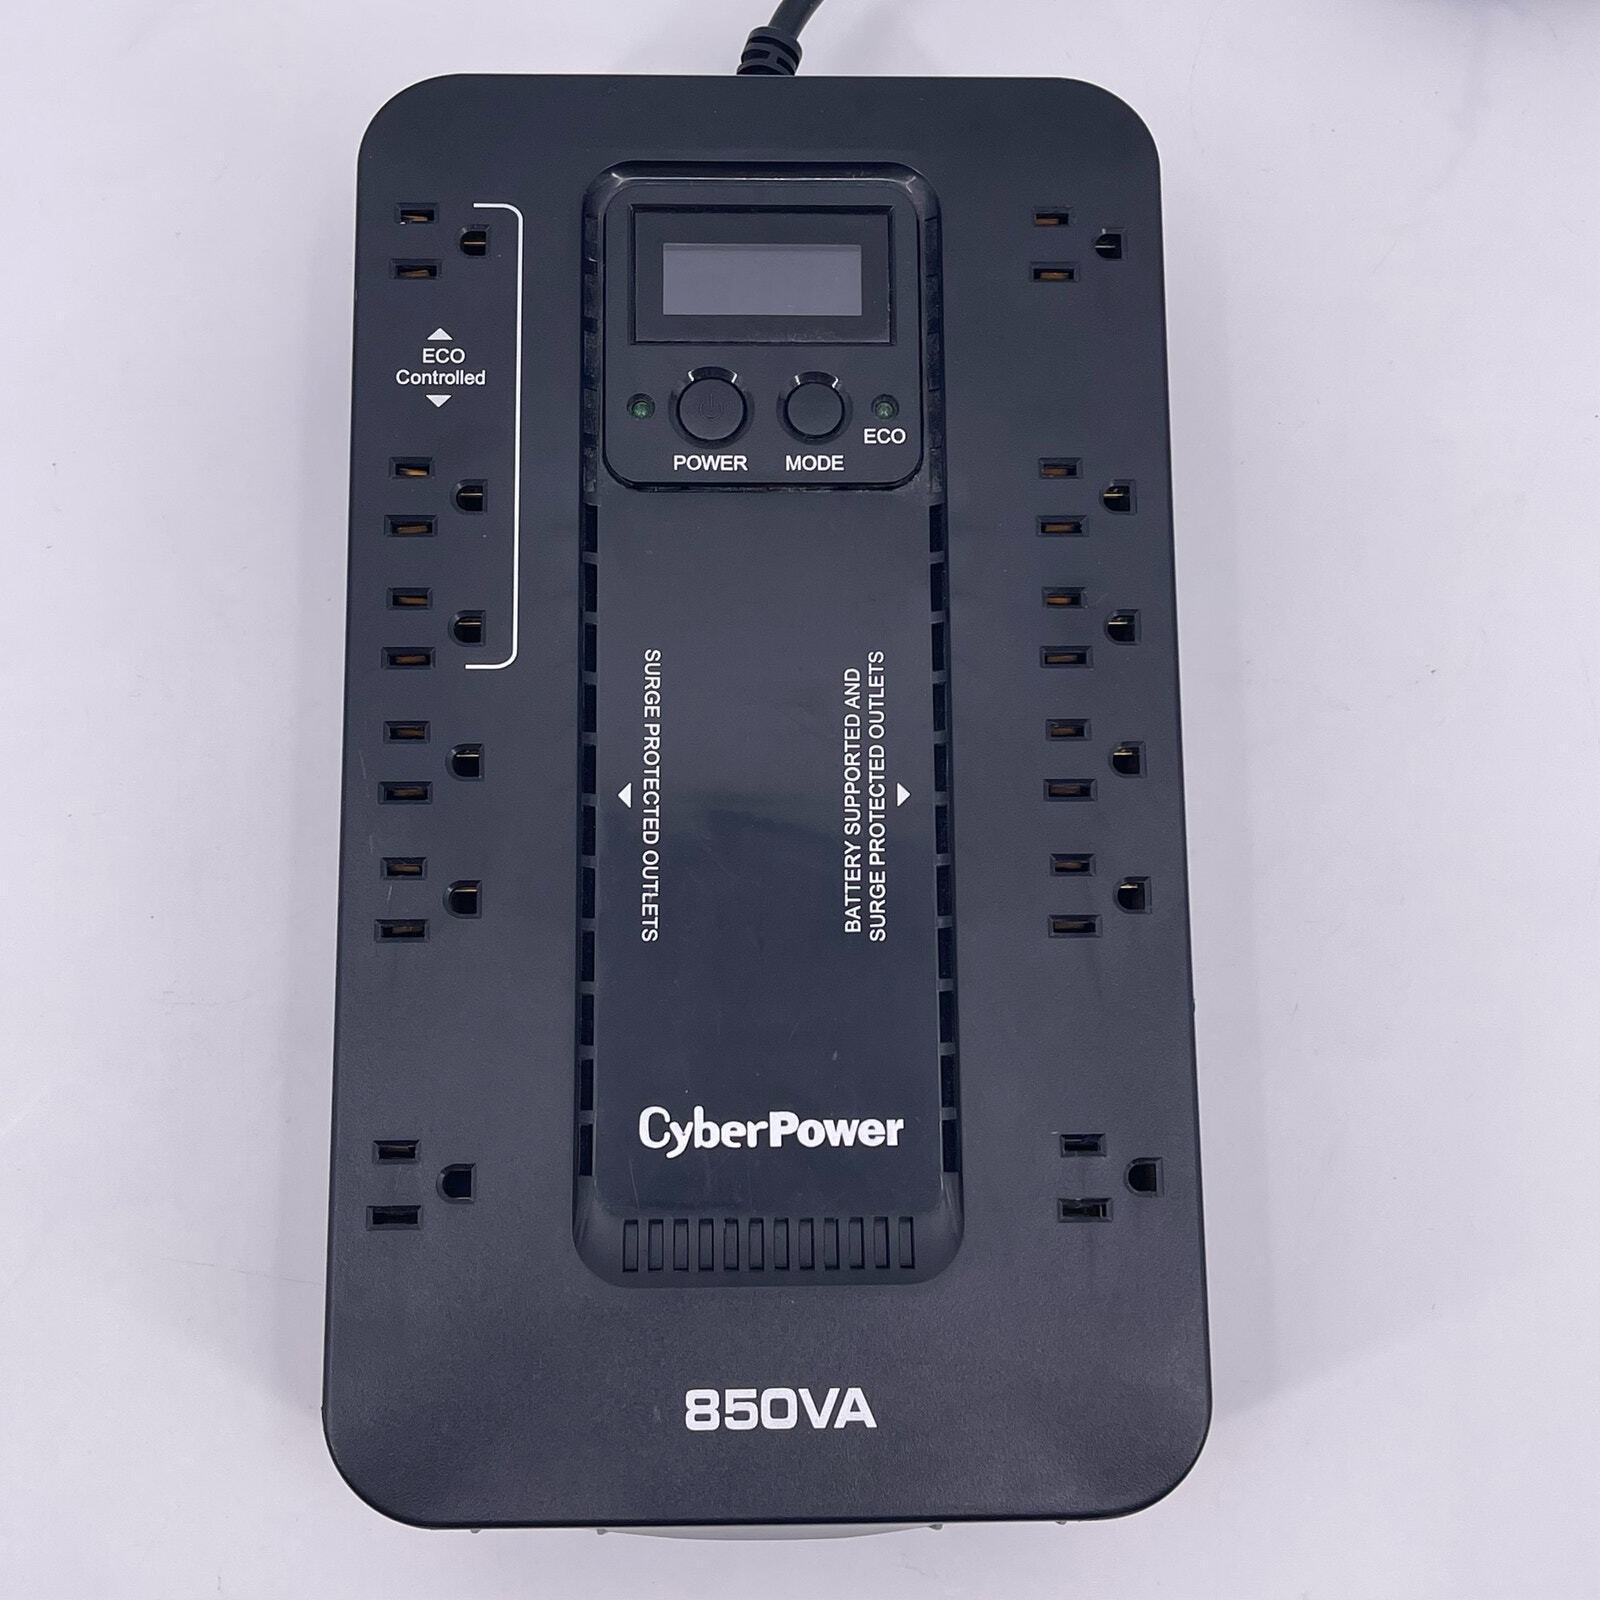 CyberPower EC850LCD Ecologic UPS Battery Back Up Surge Protector 12 Outlets